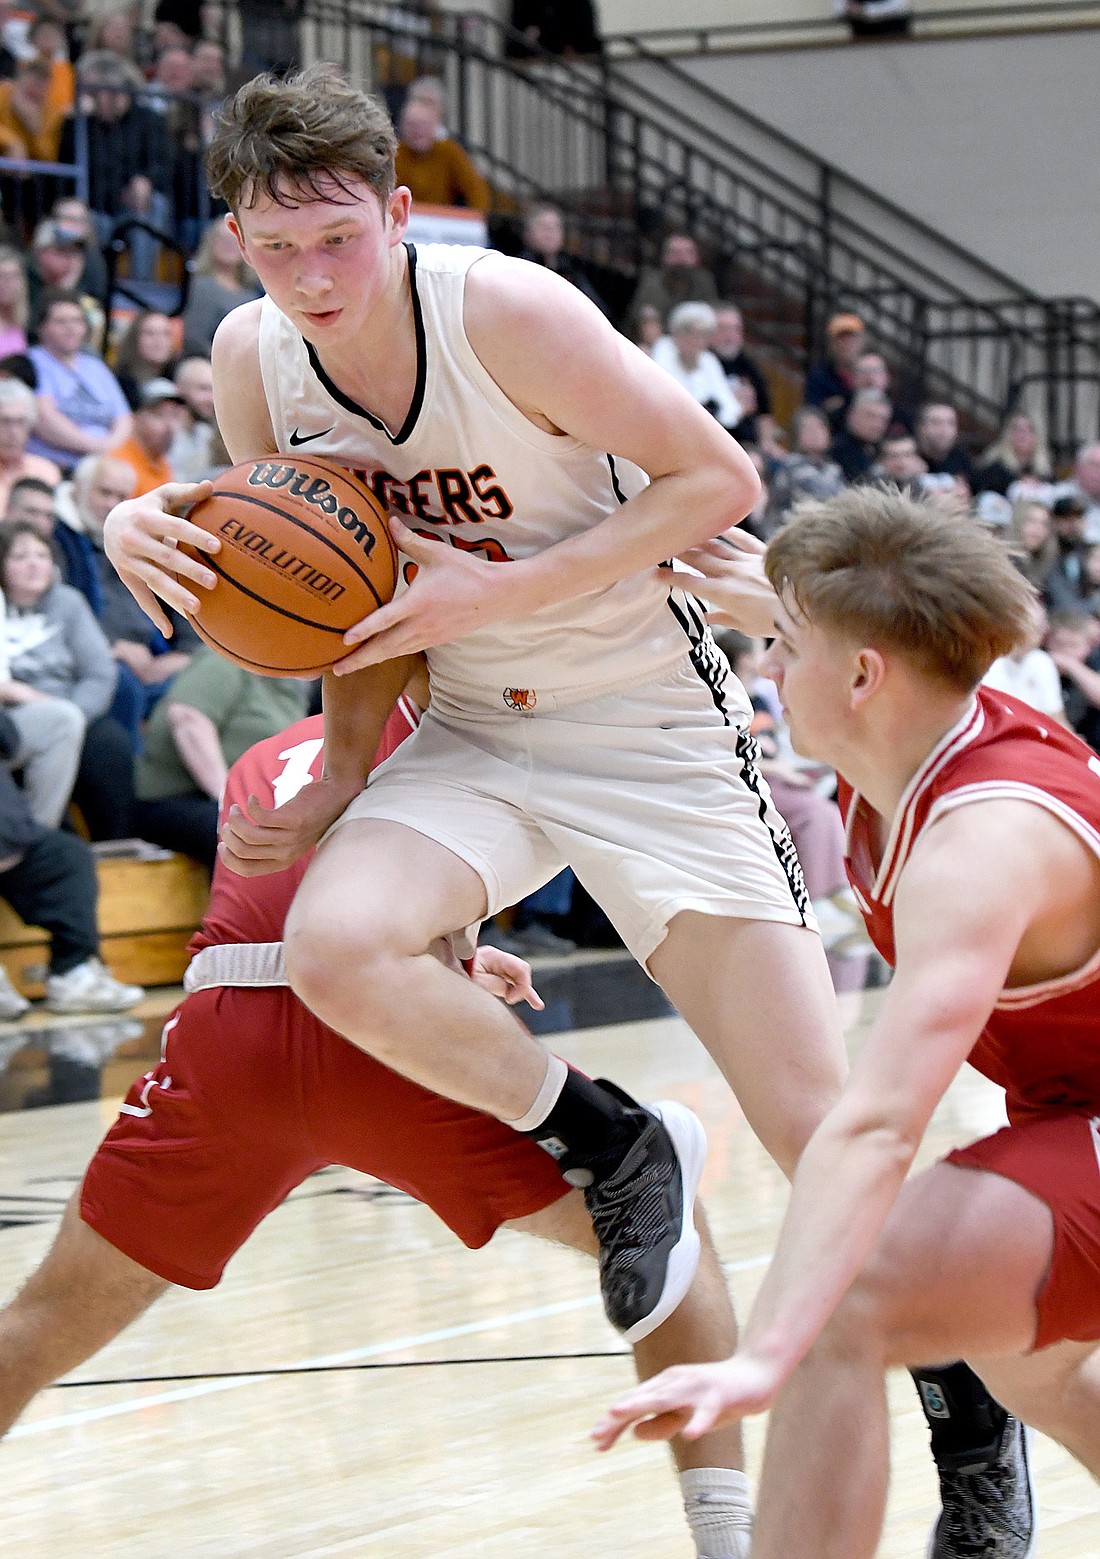 Warsaw junior Brandt Martin works his way to the basket between a pair of Plymouth defenders during the second quarter. Photo by Gary Nieter